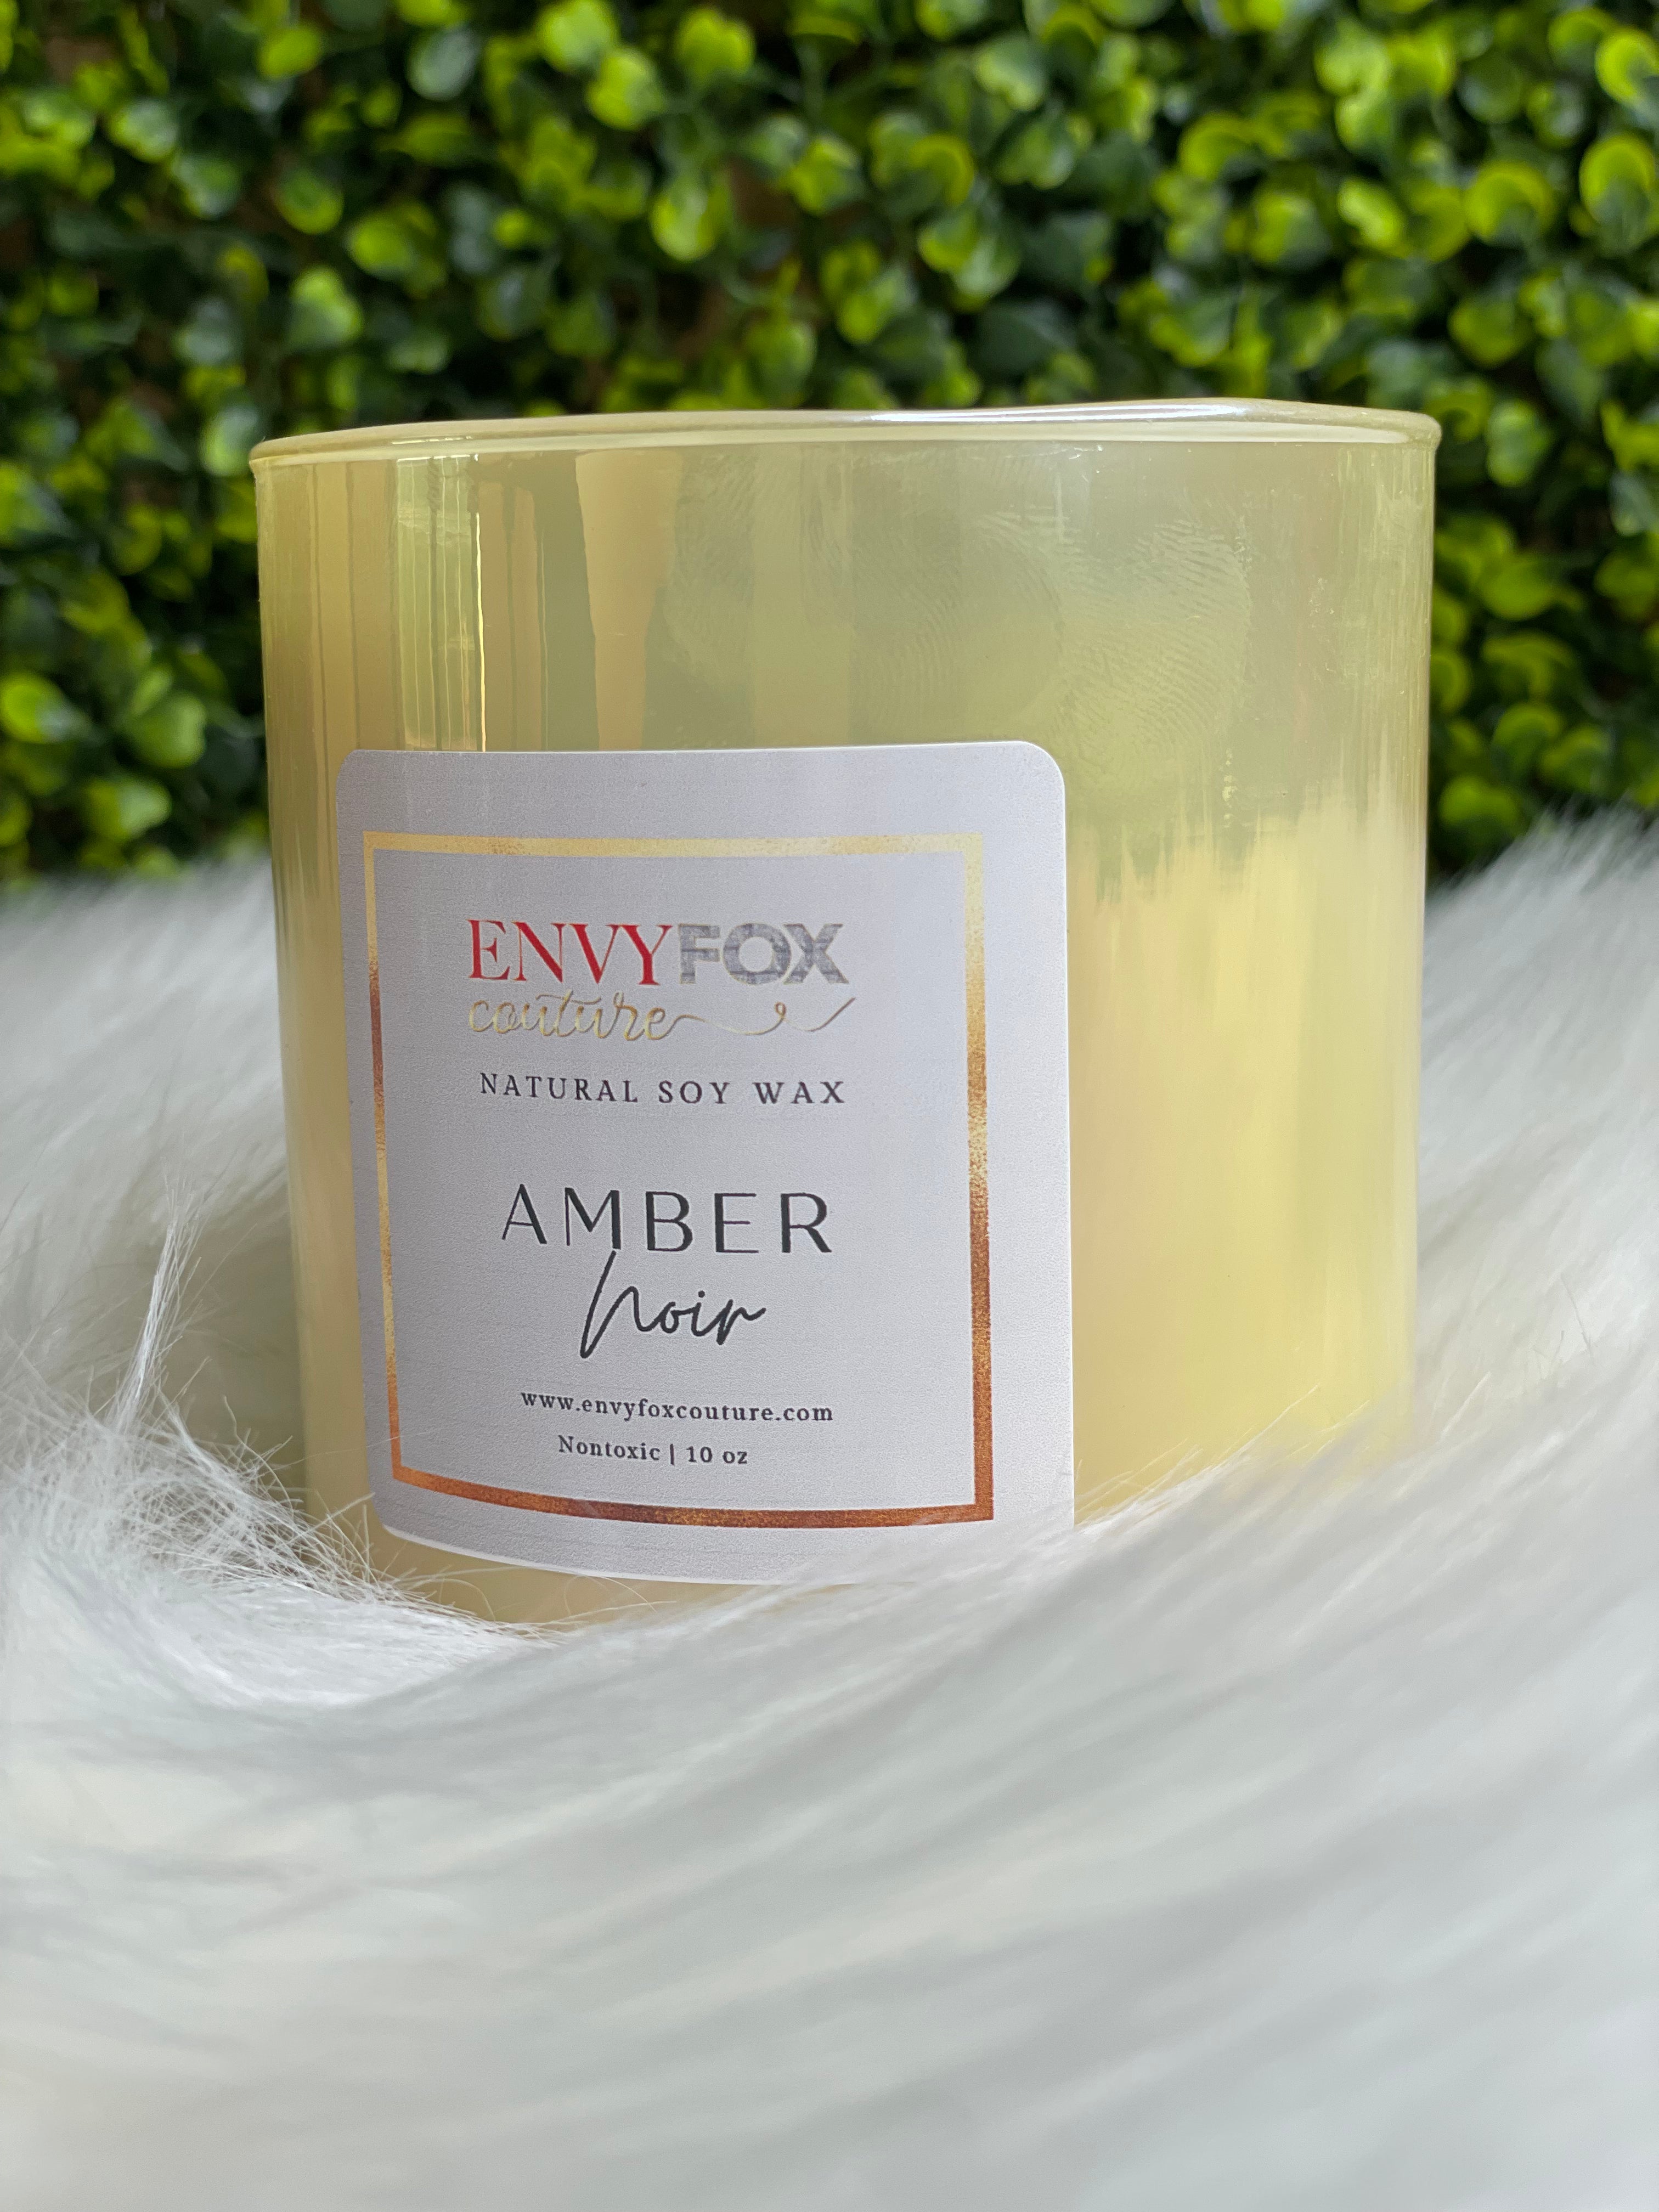 Amber Noir 10 oz Natural Soy Wax Candle